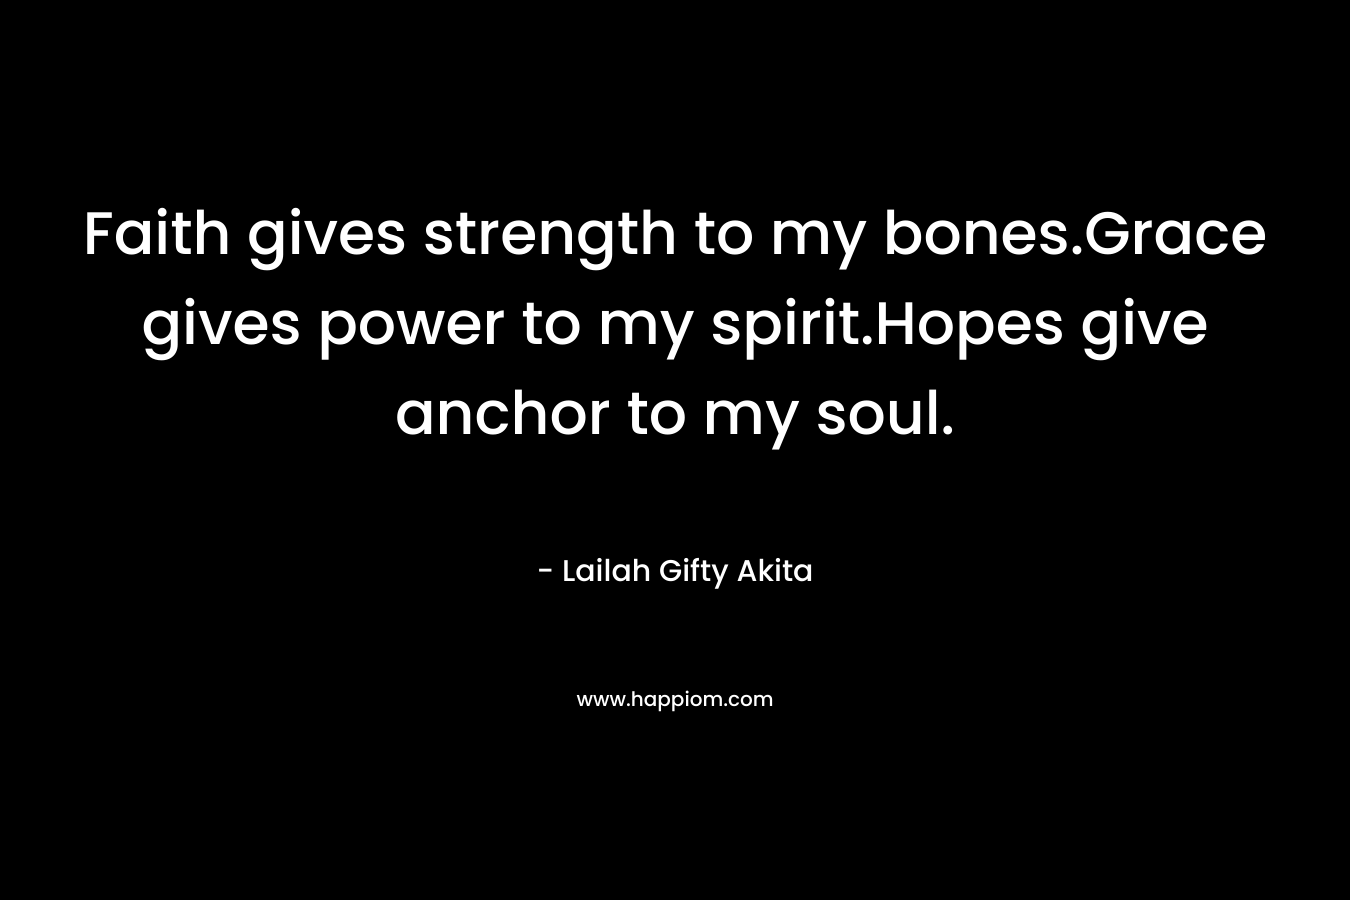 Faith gives strength to my bones.Grace gives power to my spirit.Hopes give anchor to my soul. – Lailah Gifty Akita